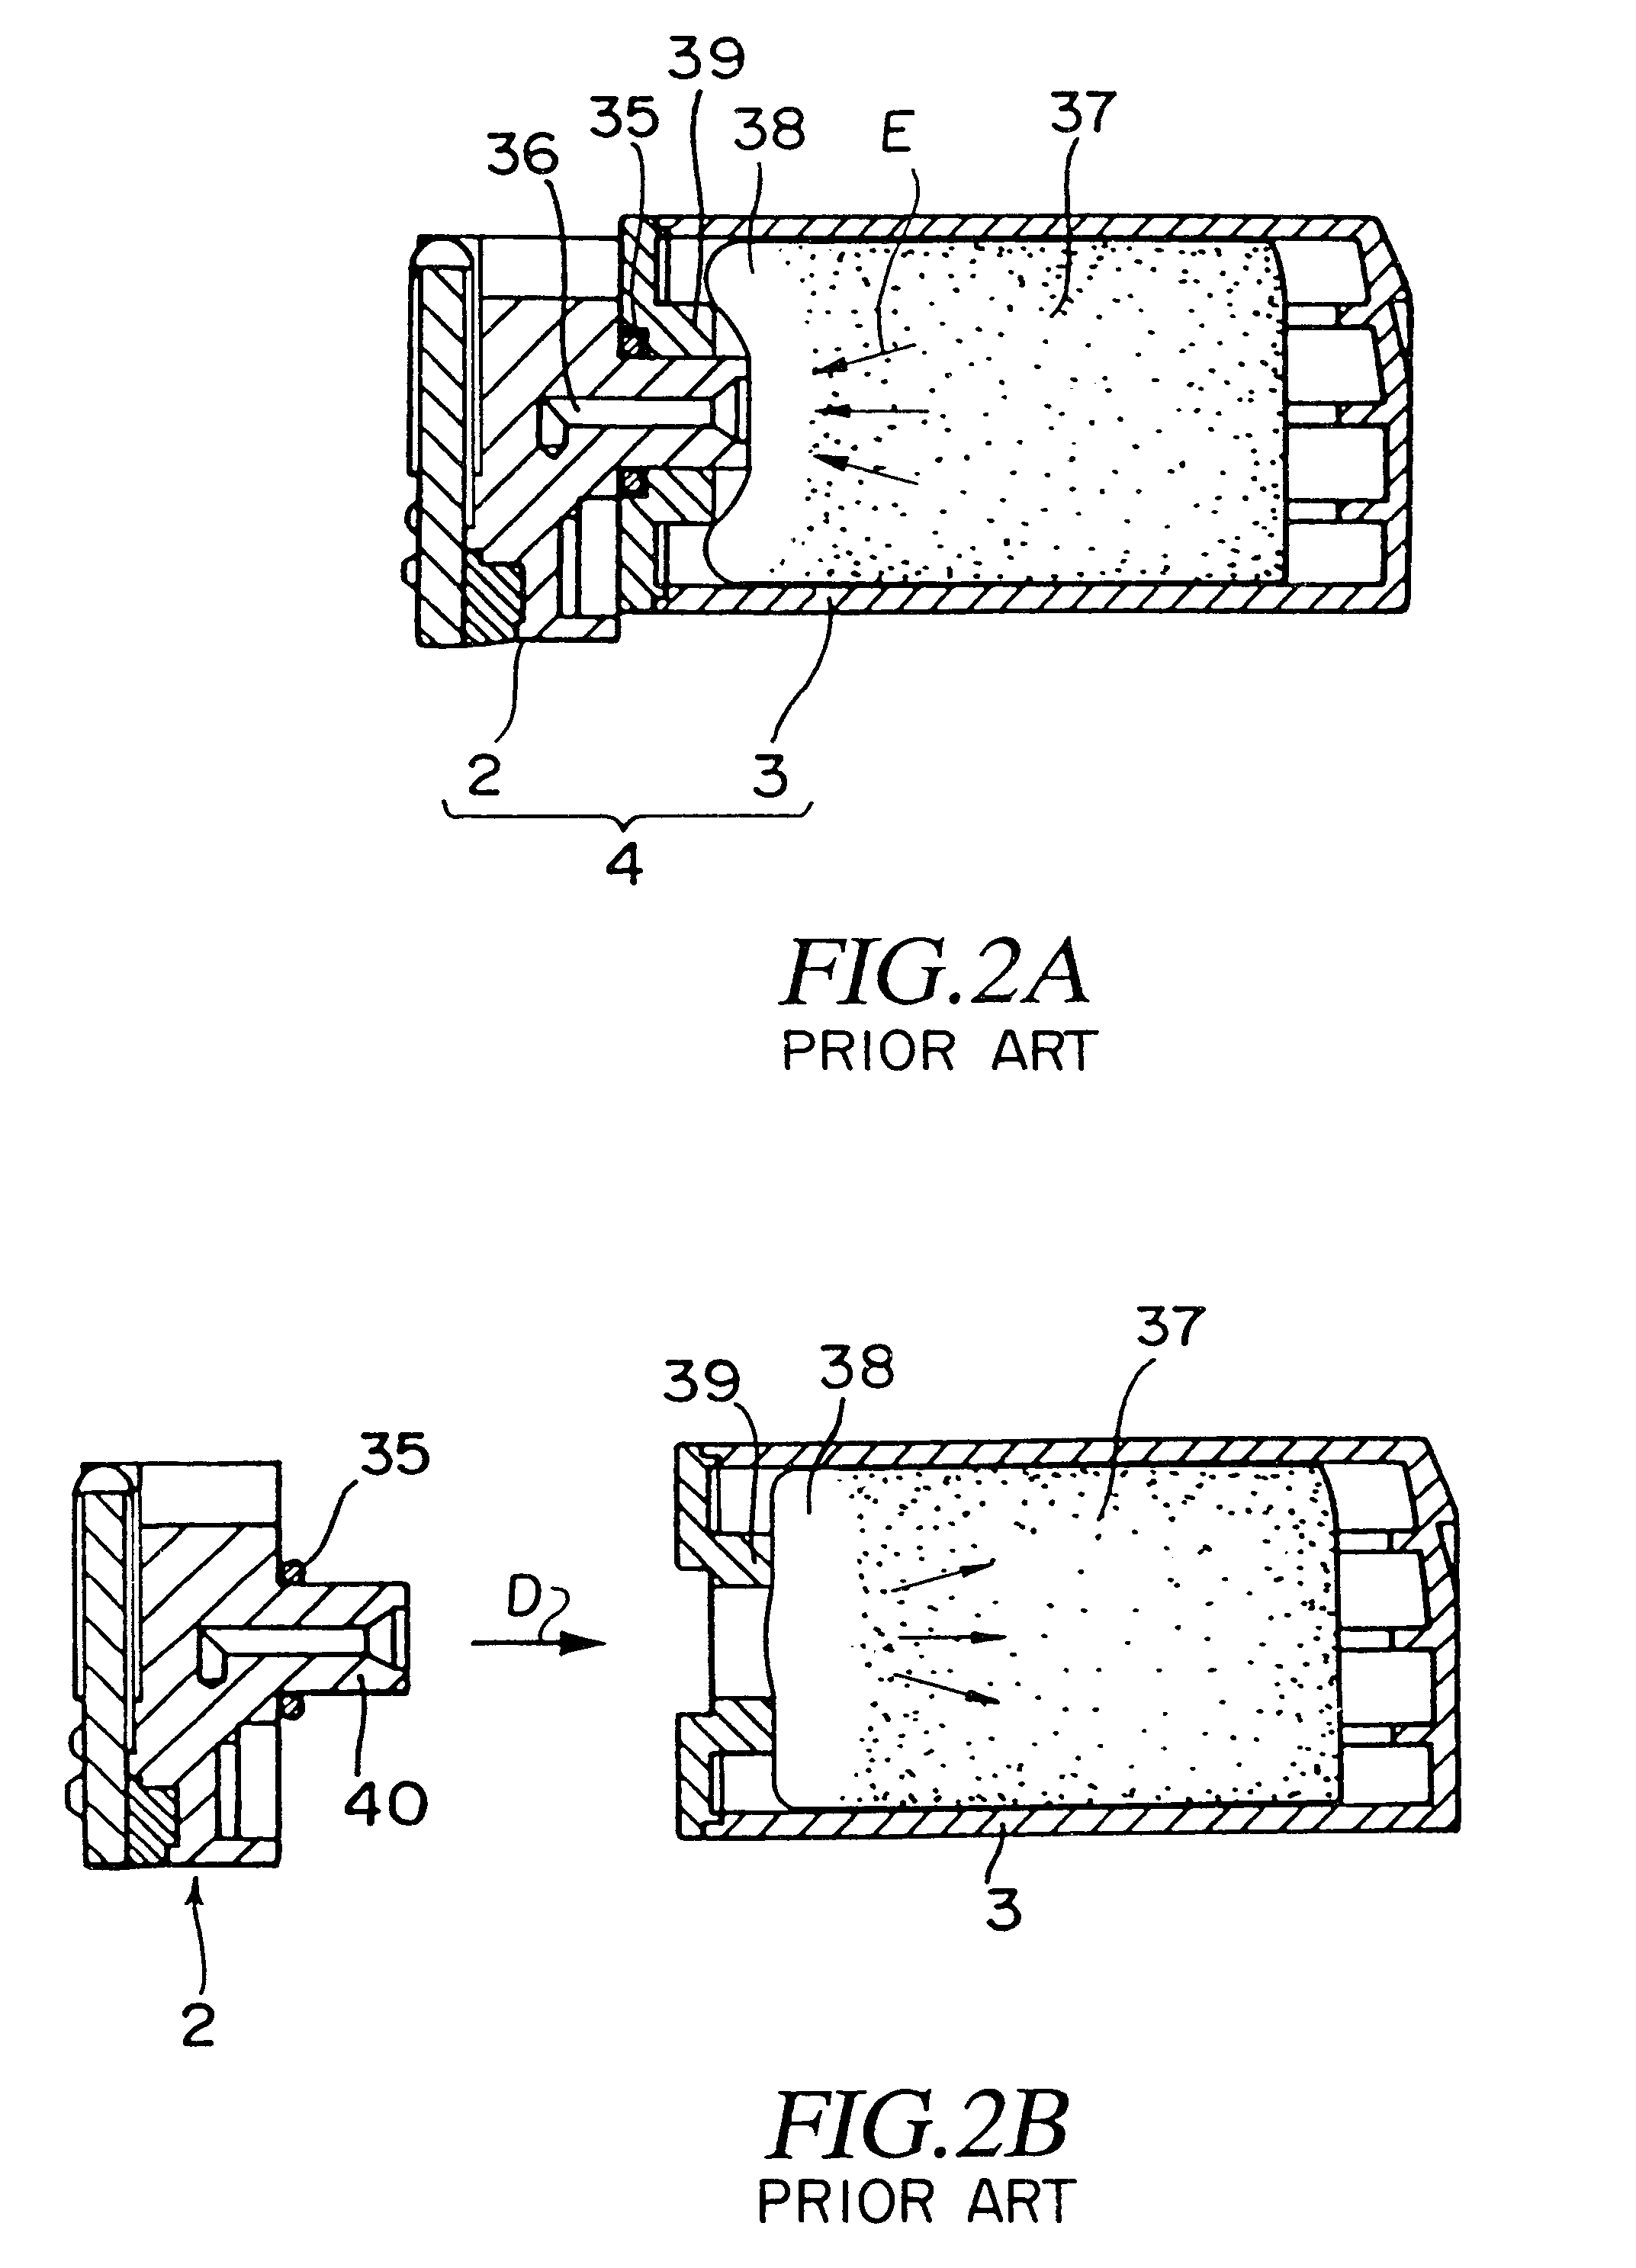 Ink jet recording apparatus using recording unit with ink cartridge having ink inducing element